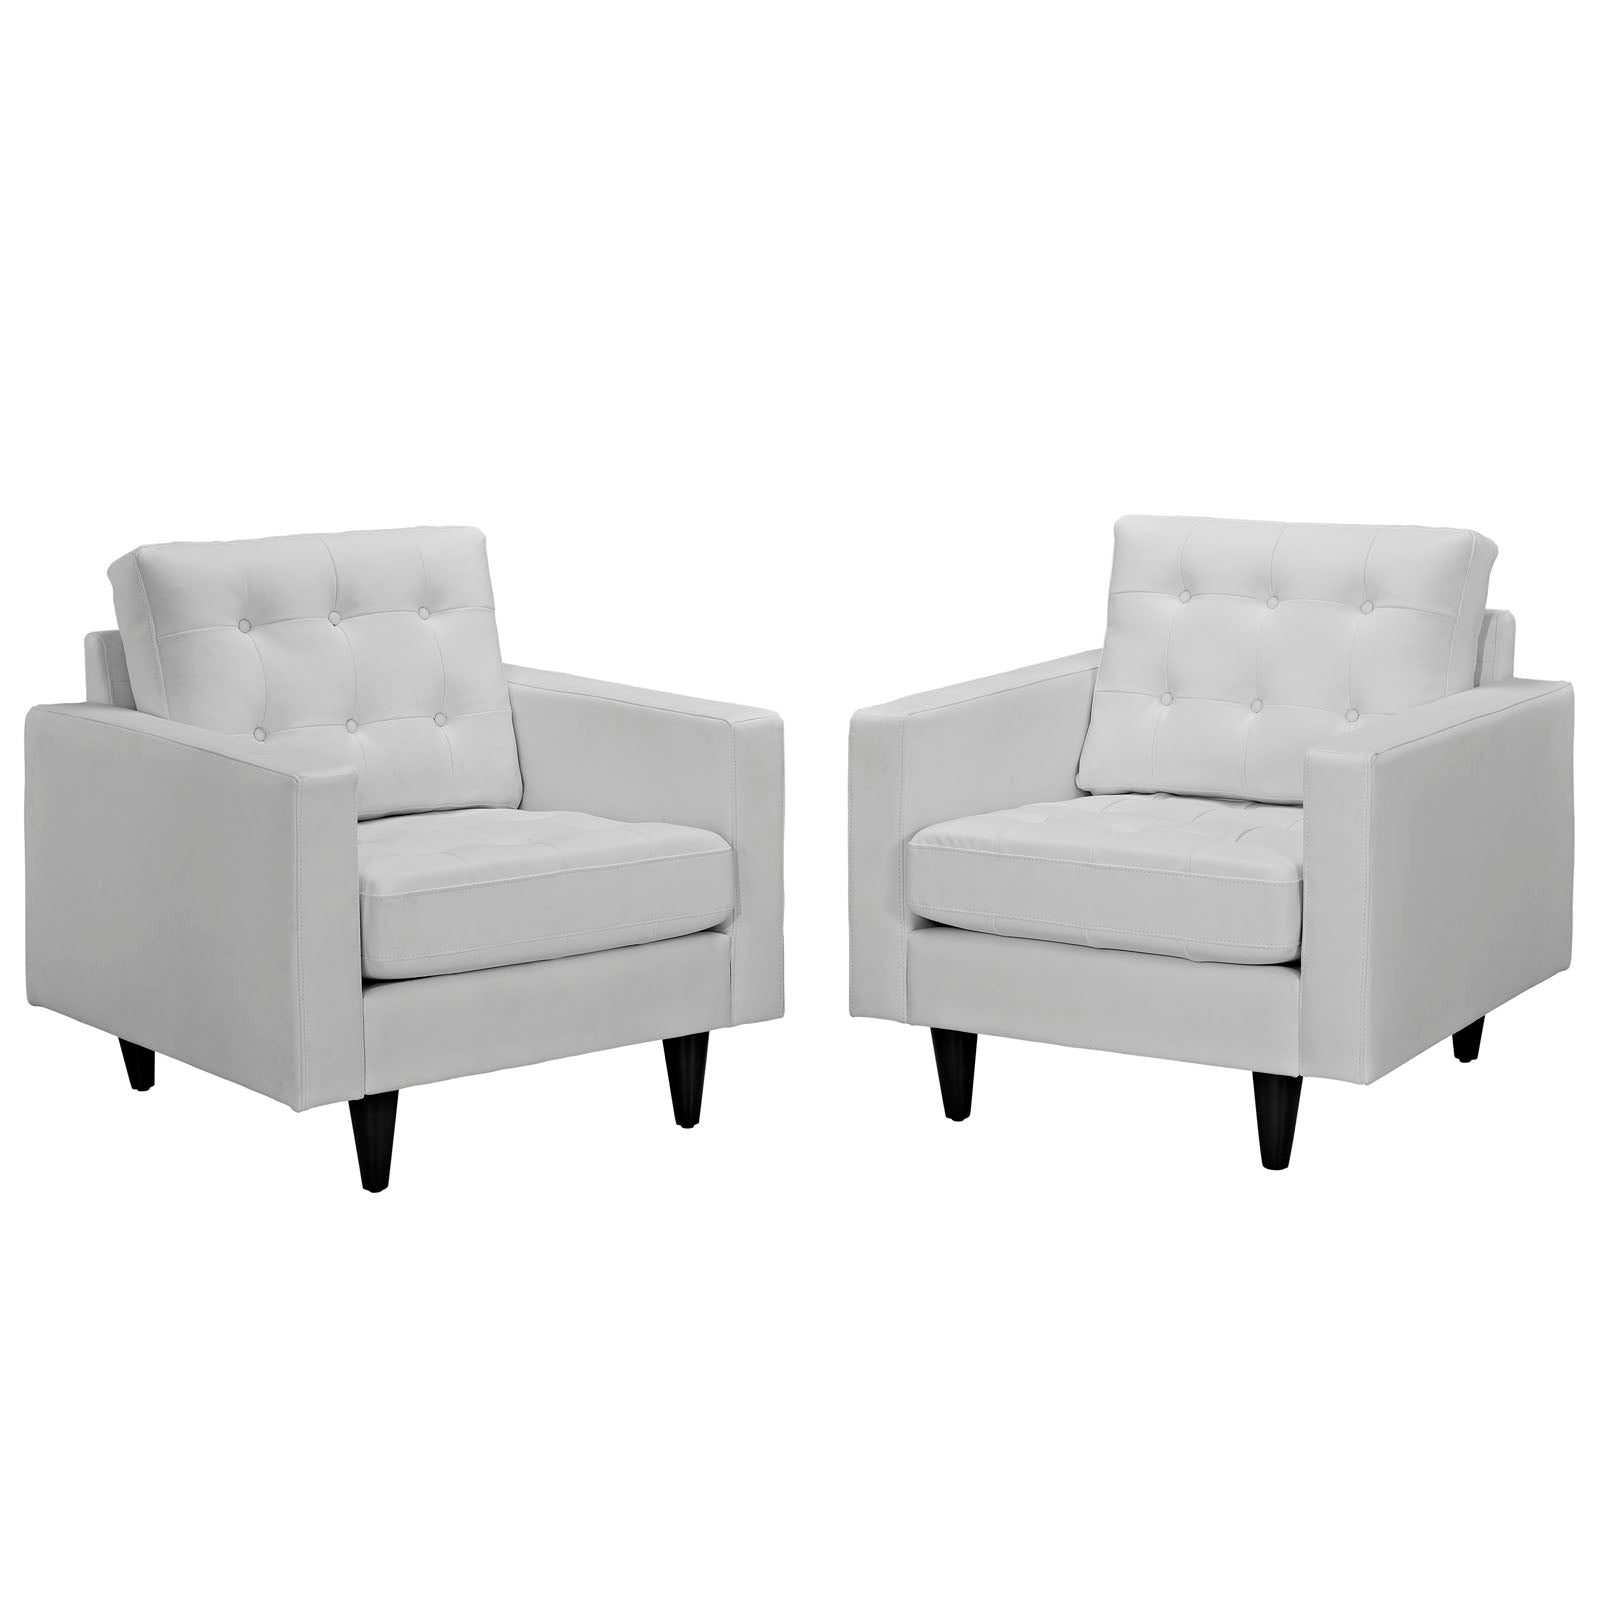 Empress Armchair Leather Set of 2 - East Shore Modern Home Furnishings